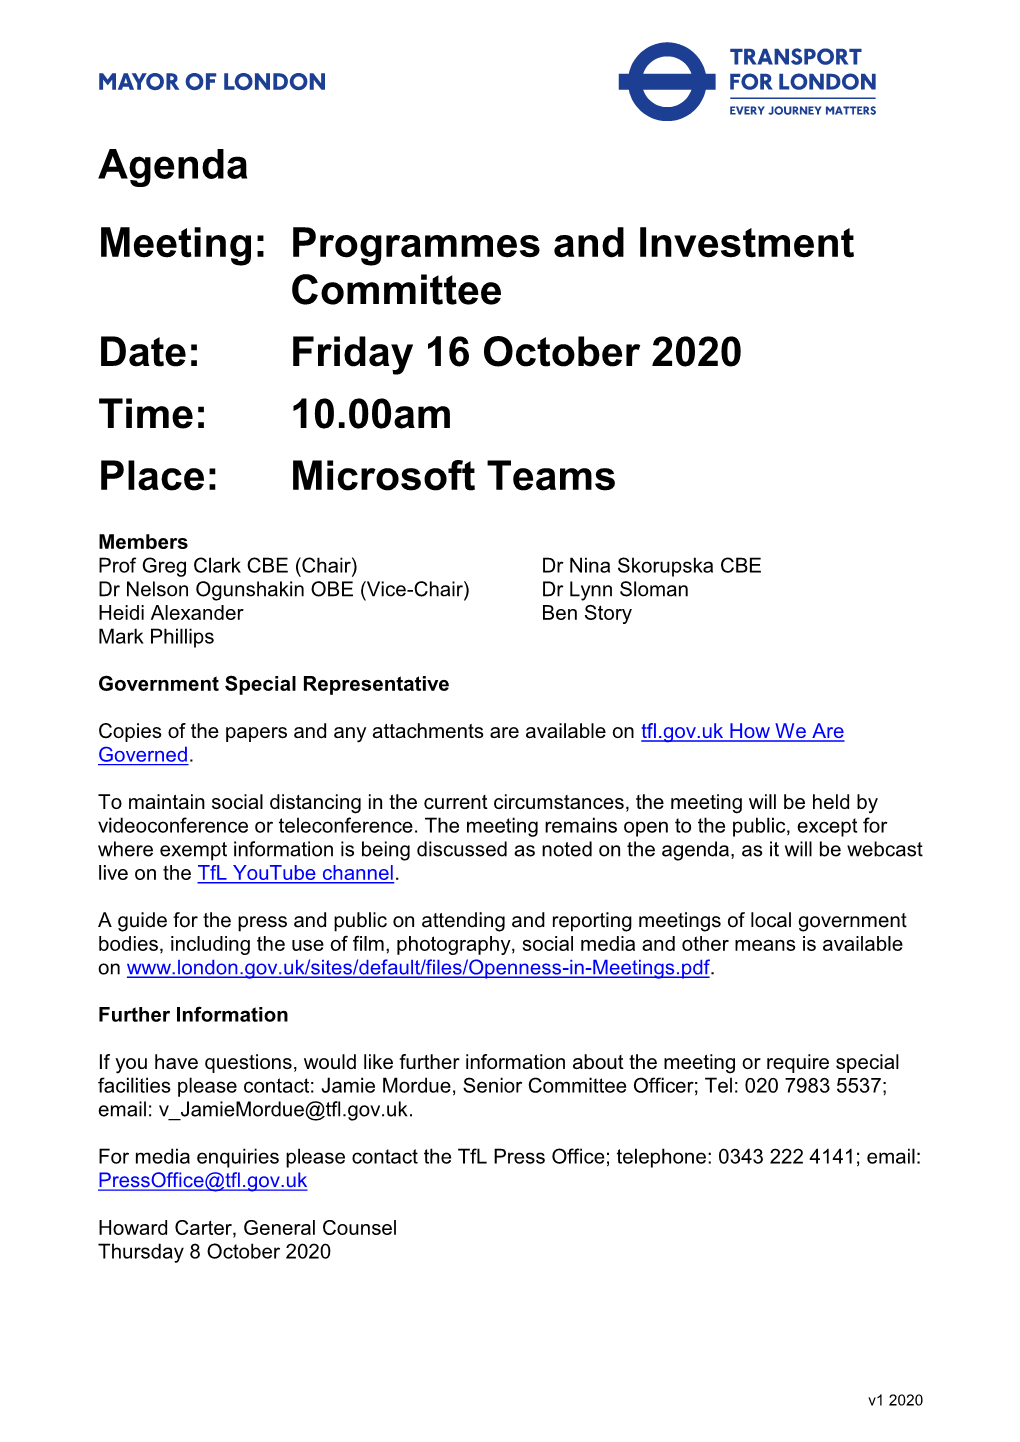 Programmes and Investment Committee Date: Friday 16 October 2020 Time: 10.00Am Place: Microsoft Teams